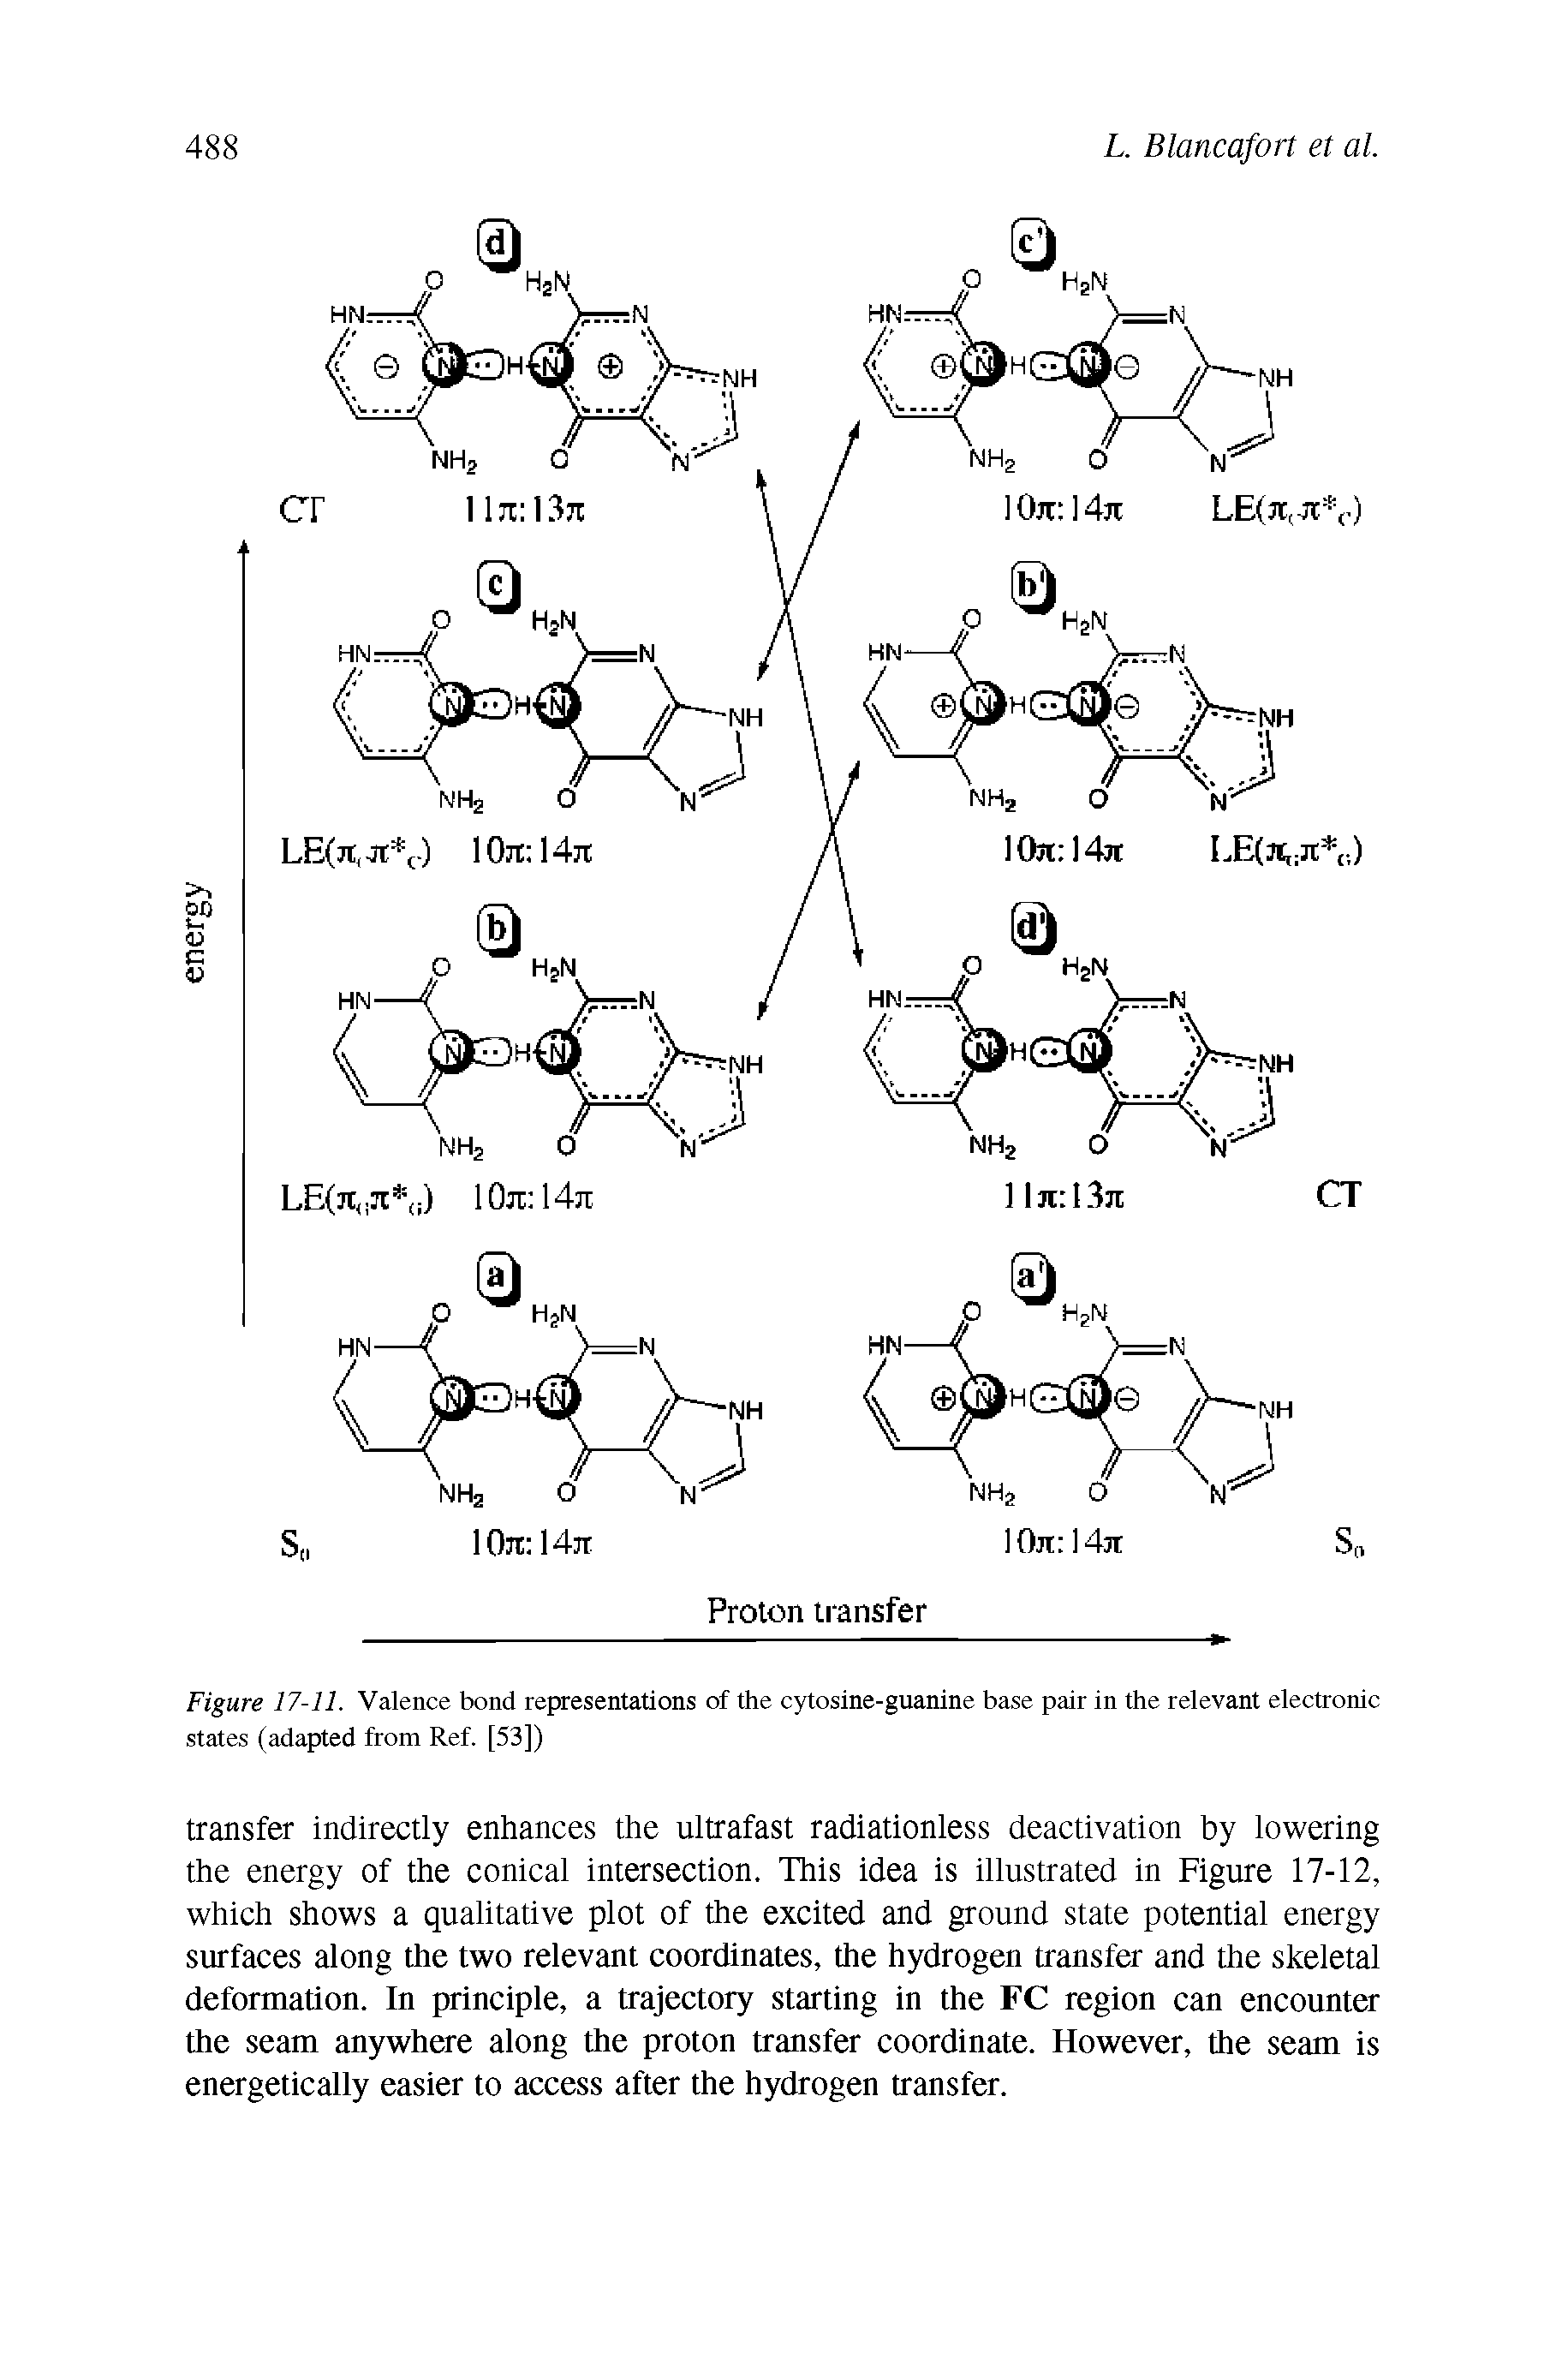 Figure 17-11. Valence bond representations of the cytosine-guanine base pair in the relevant electronic states (adapted from Ref. [53])...